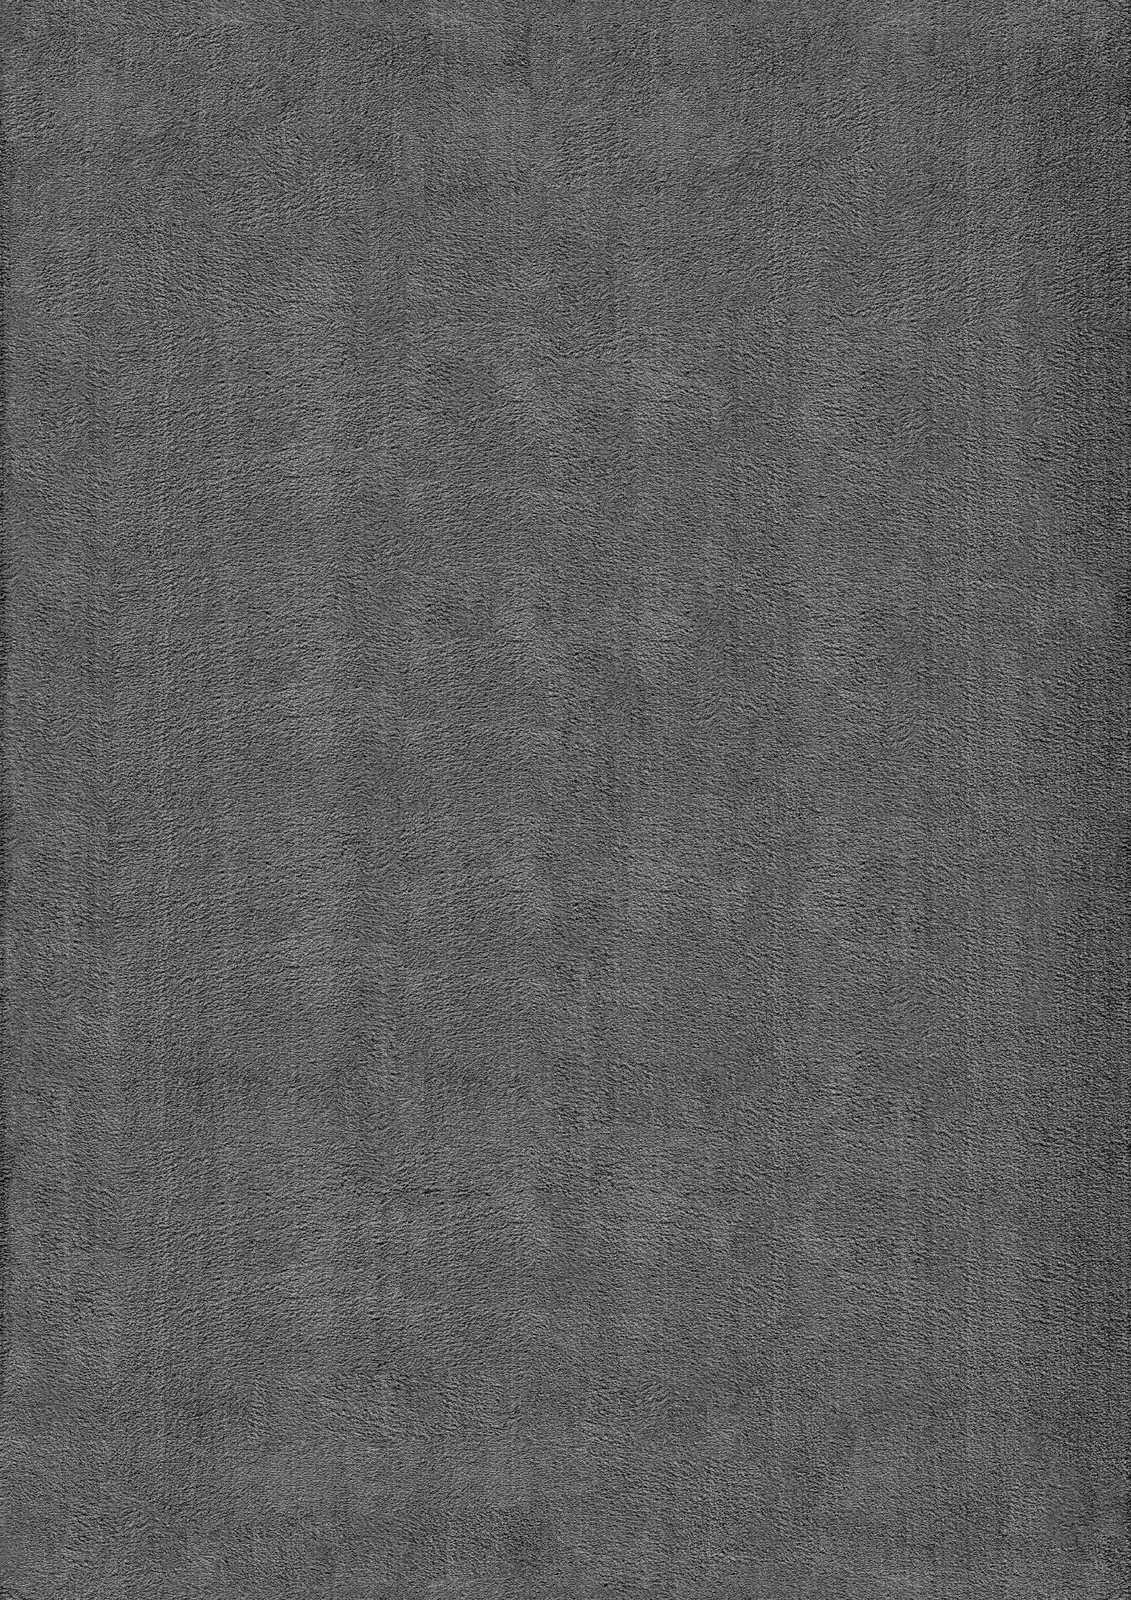             Fluffy high pile carpet in anthracite - 110 x 60 cm
        